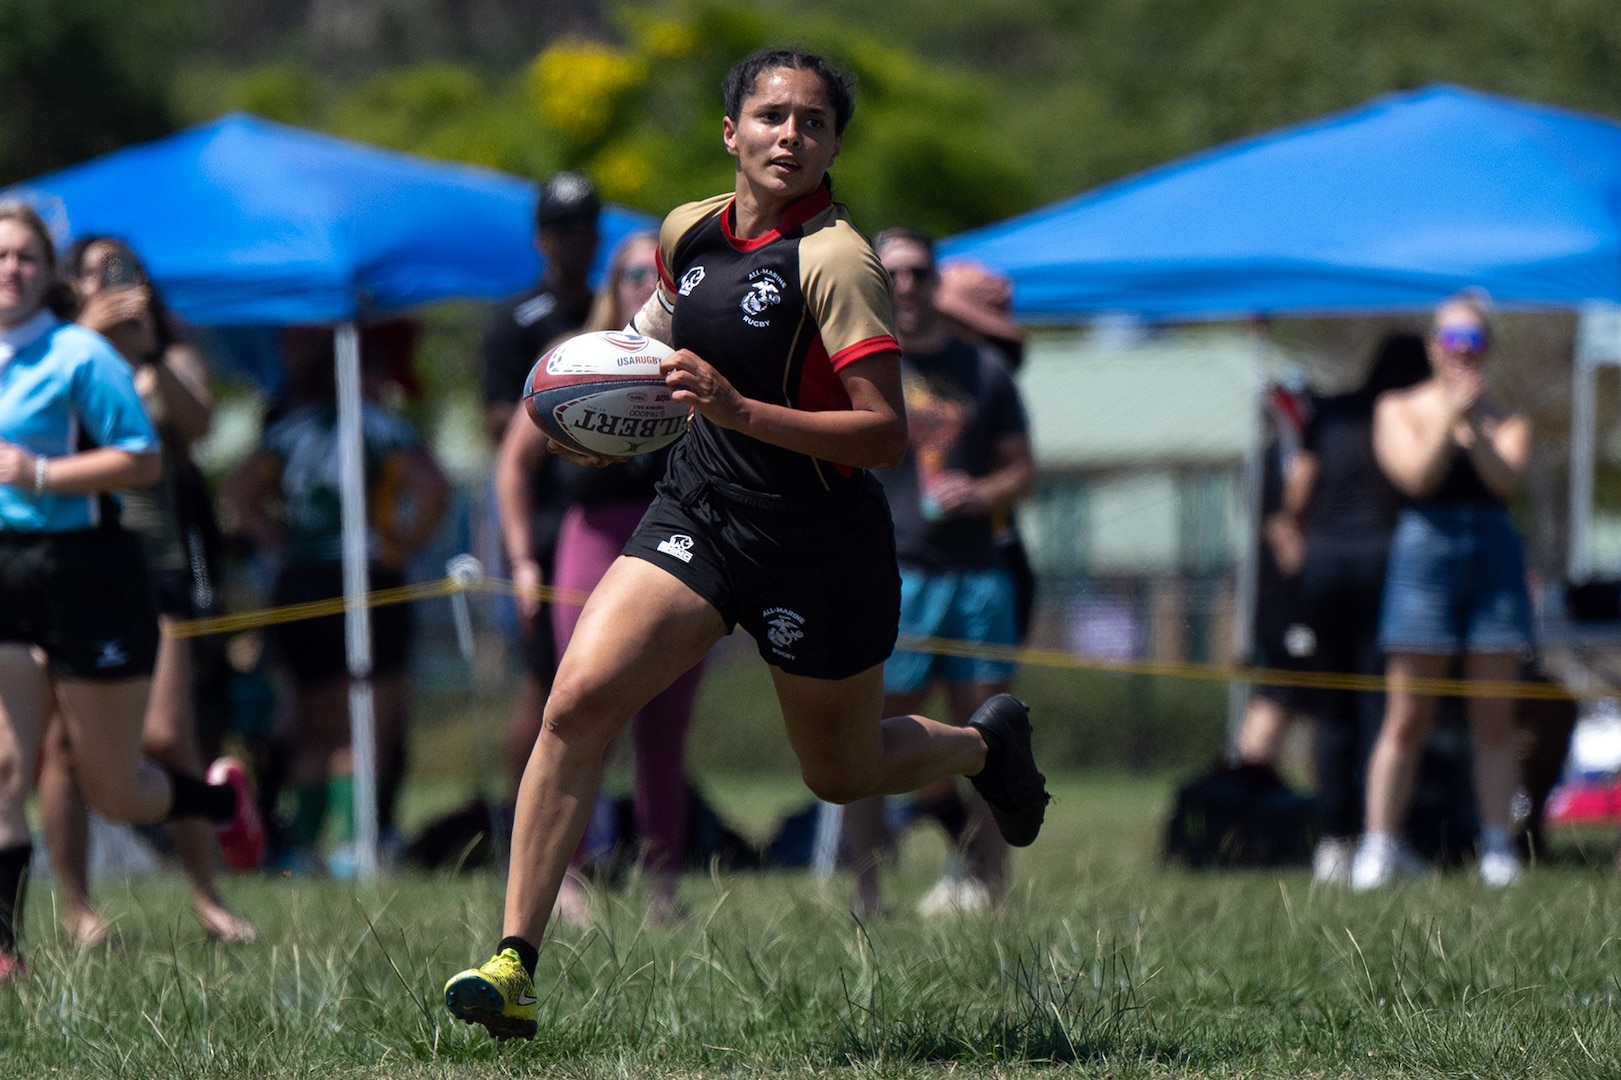 Marine Corps Sgt. Vivian Aragon breaks away on a scoring run during the 2024 Armed Forces Women’s Rugby Championship in San Diego, California, July 12, 2024. (DoD photo by EJ Hersom)